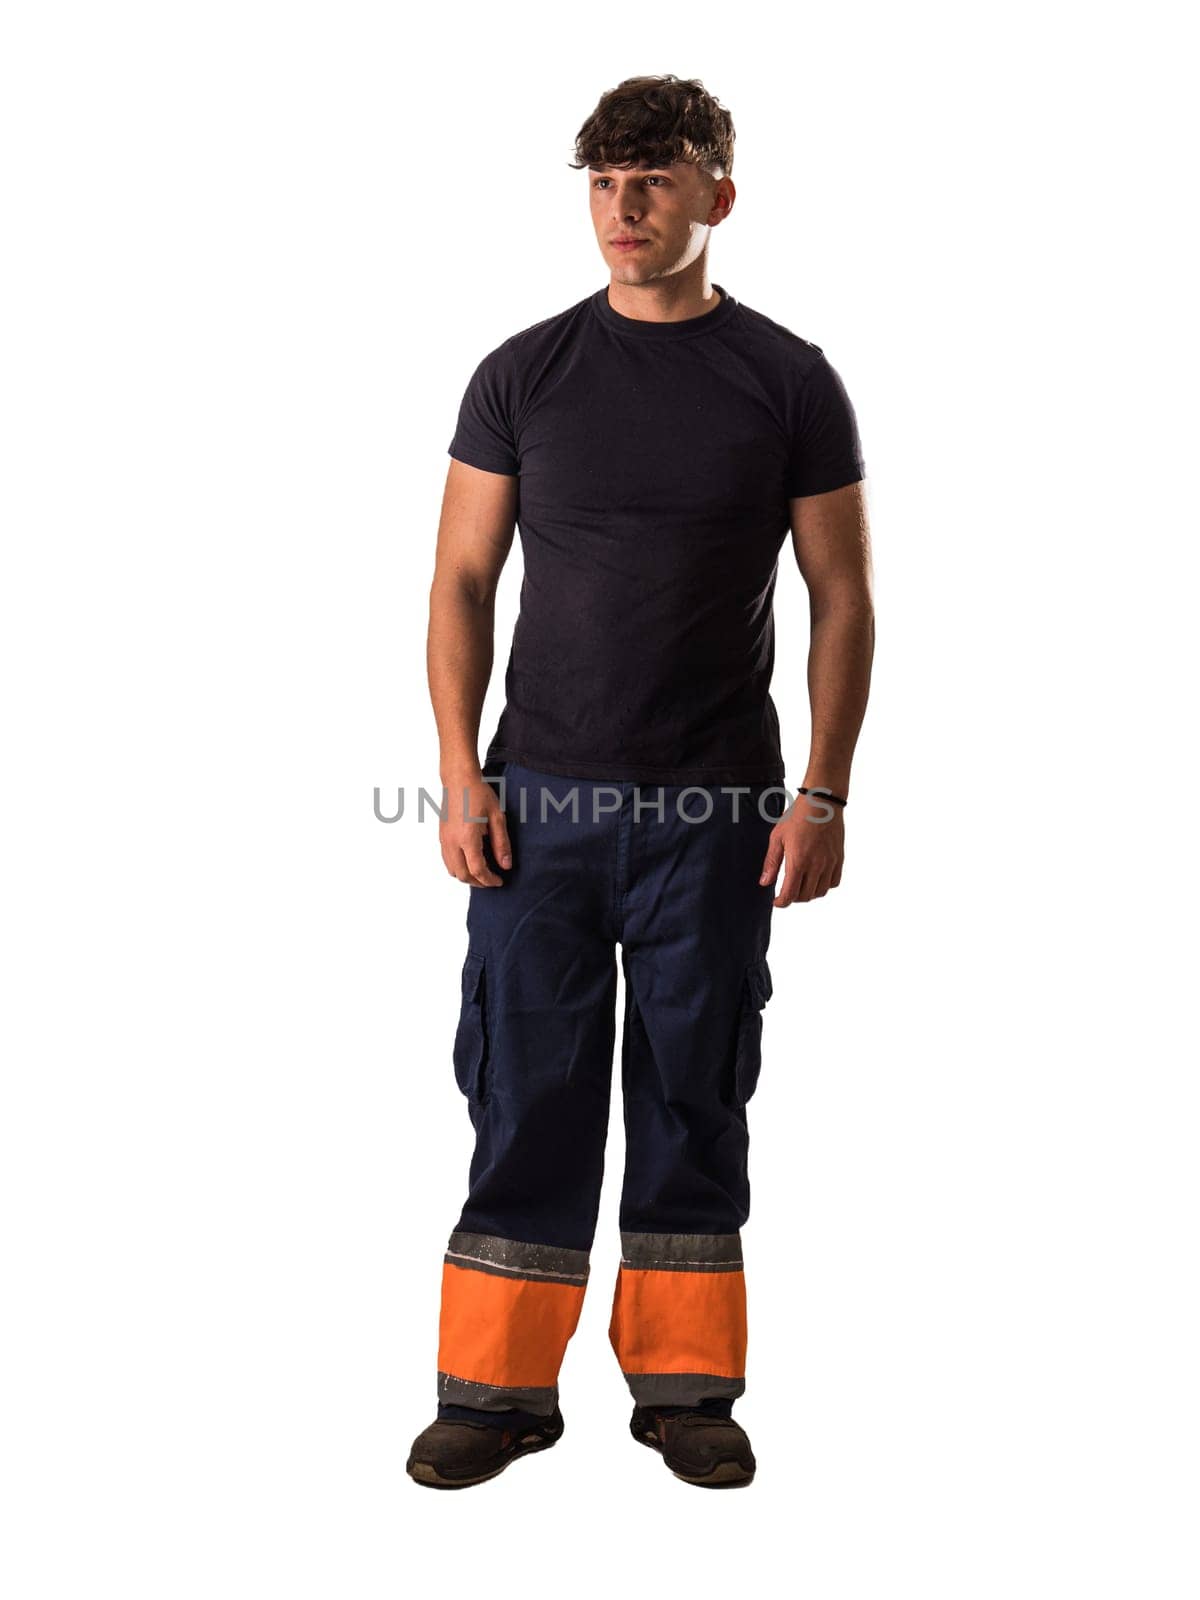 Construction Worker in Protective Gear by artofphoto